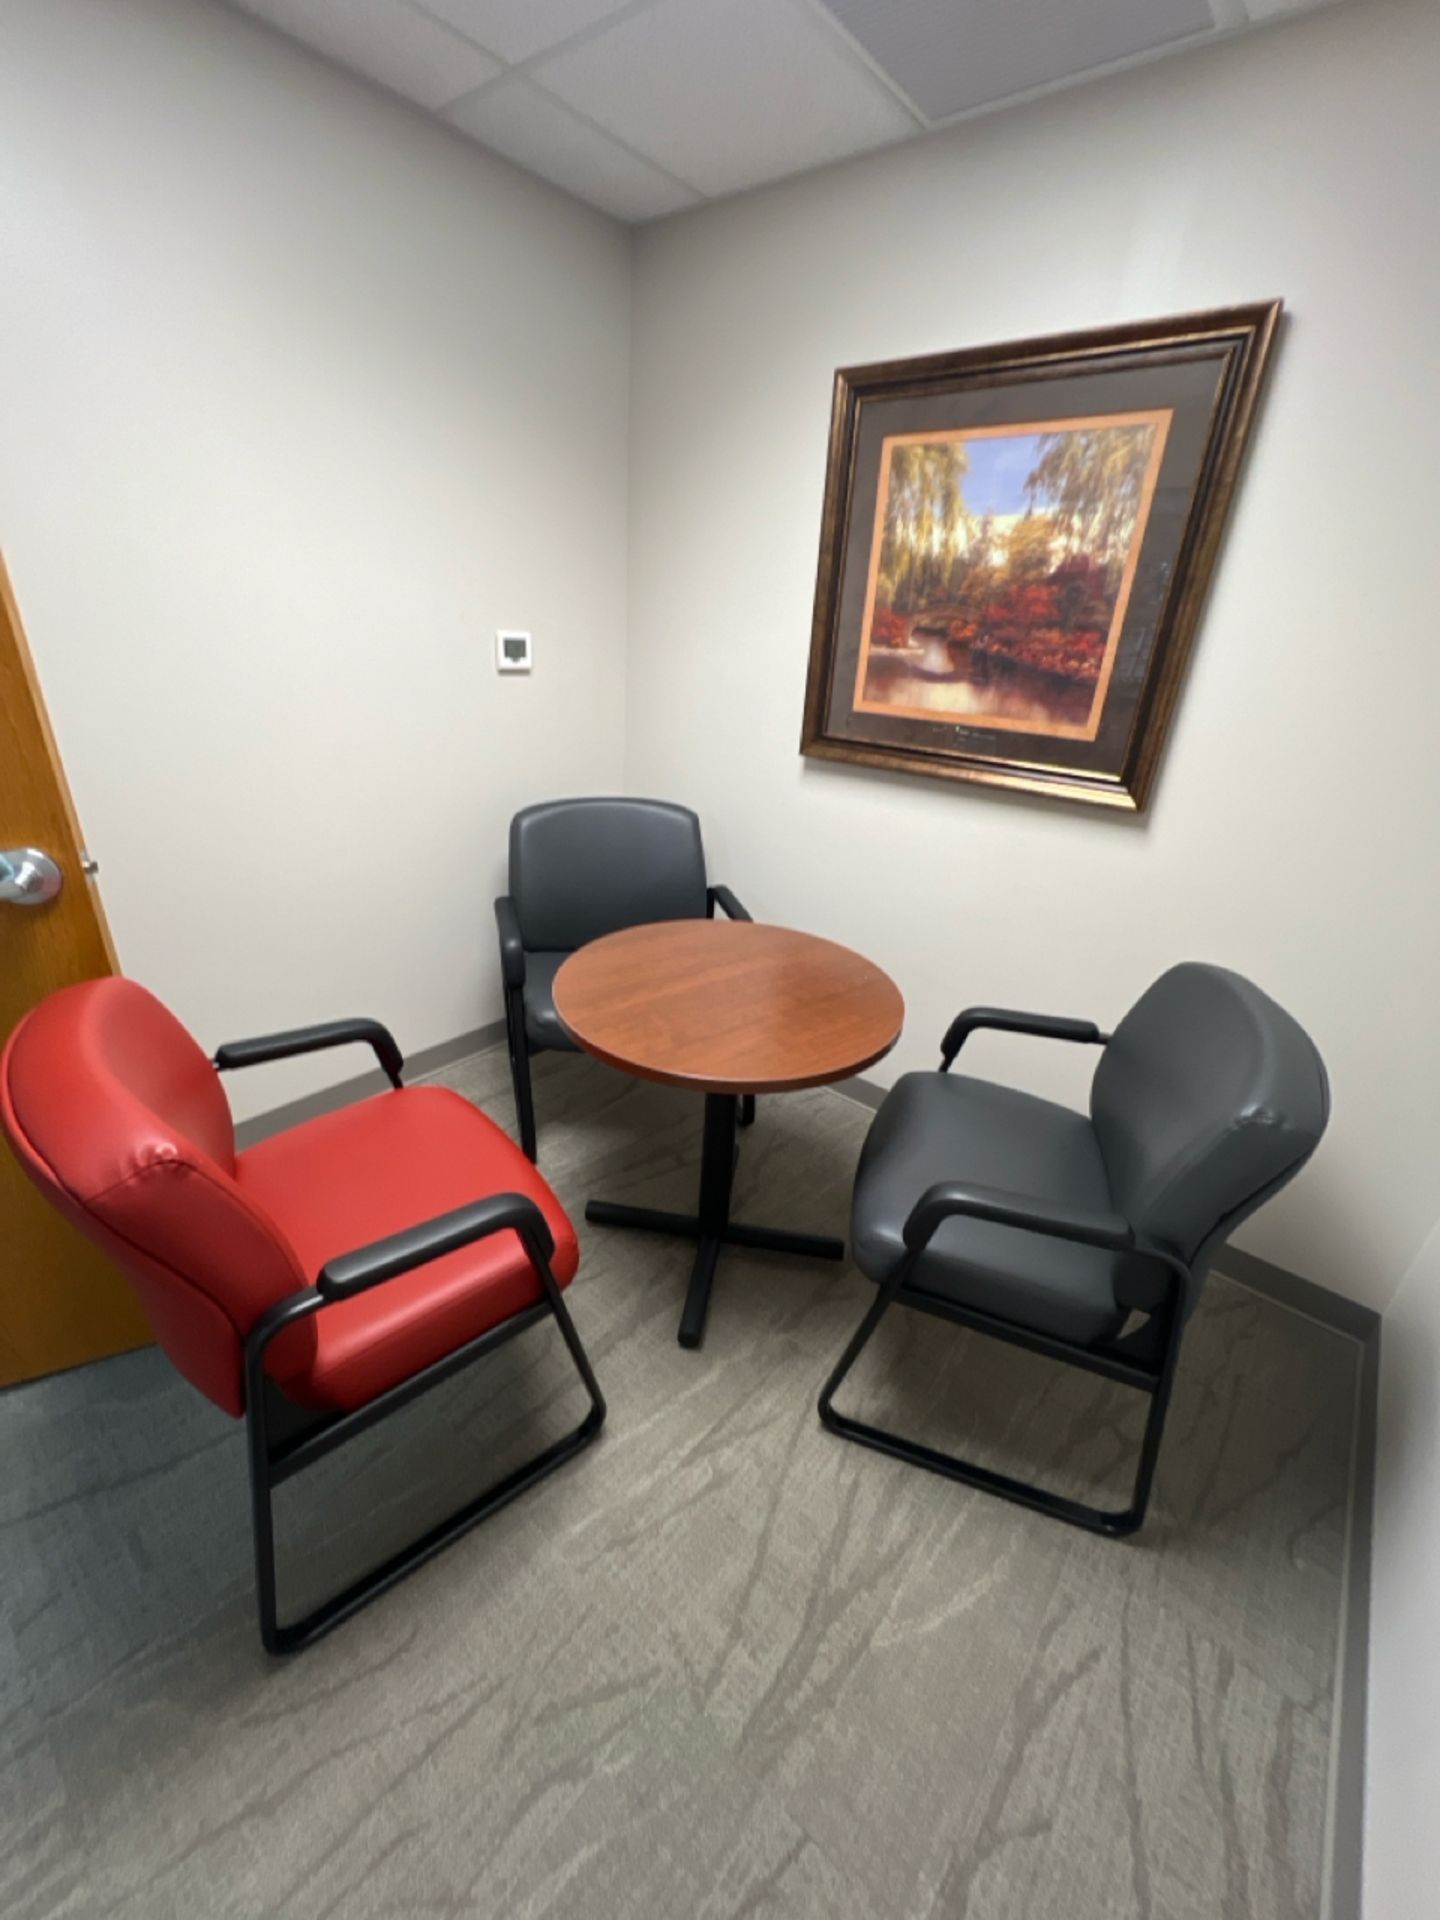 ROOMS TO INCLUDE: TABLES, CHAIRS, ARTWORK, CLOCKS - Image 2 of 4